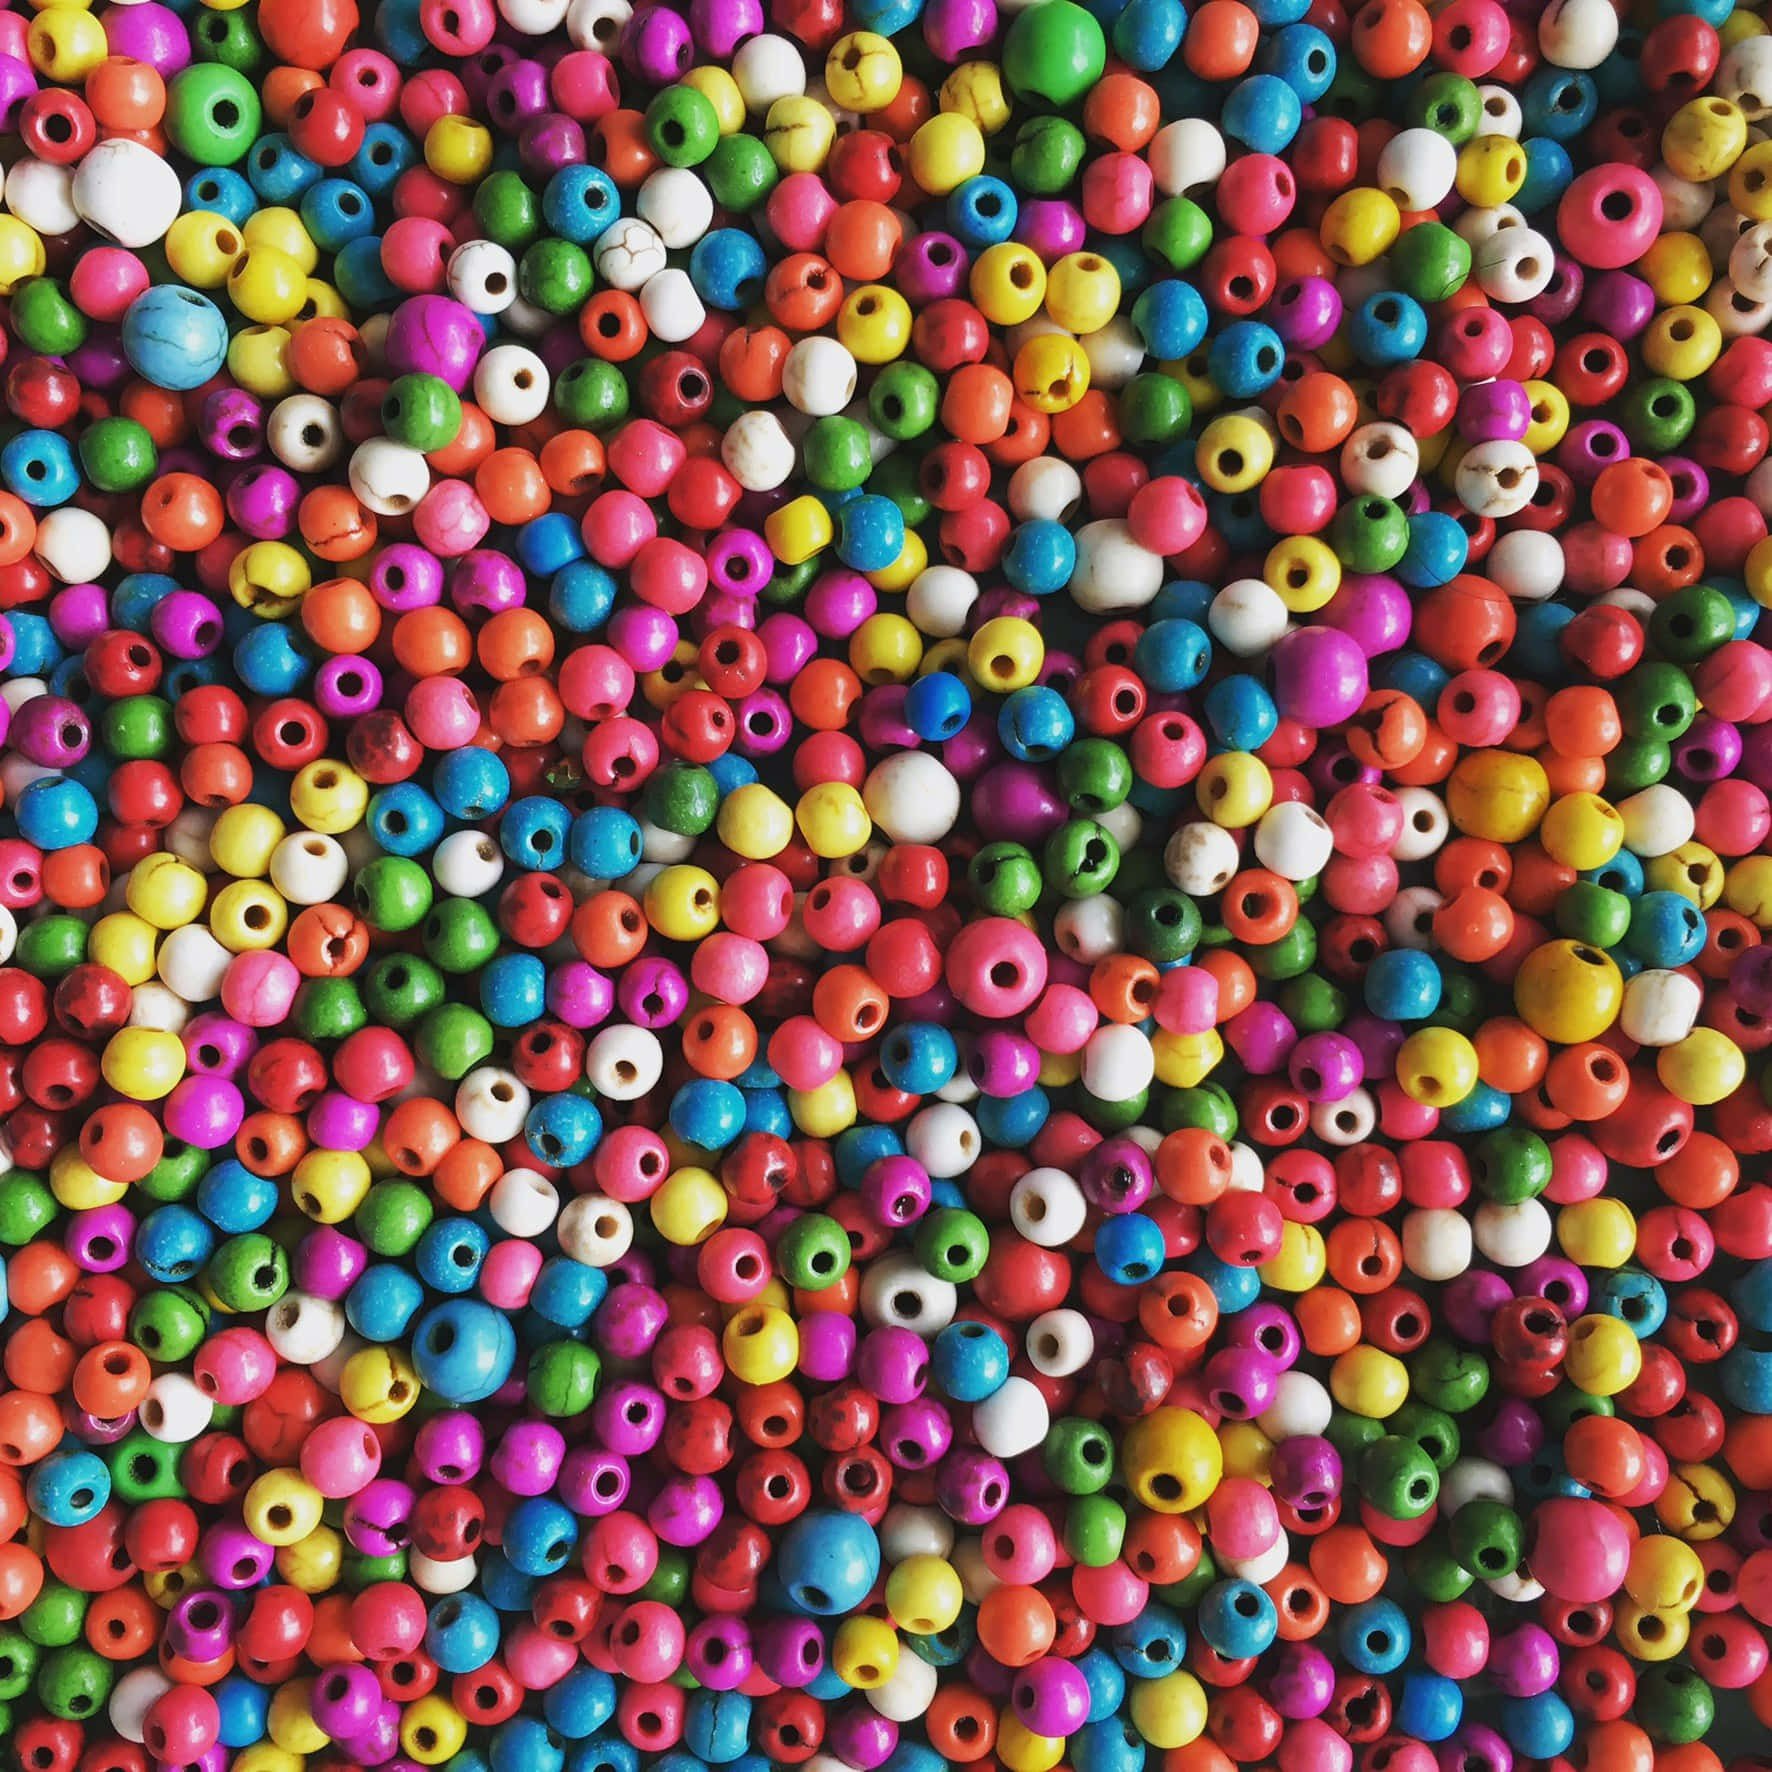 Colorful Beads Texture Wallpaper